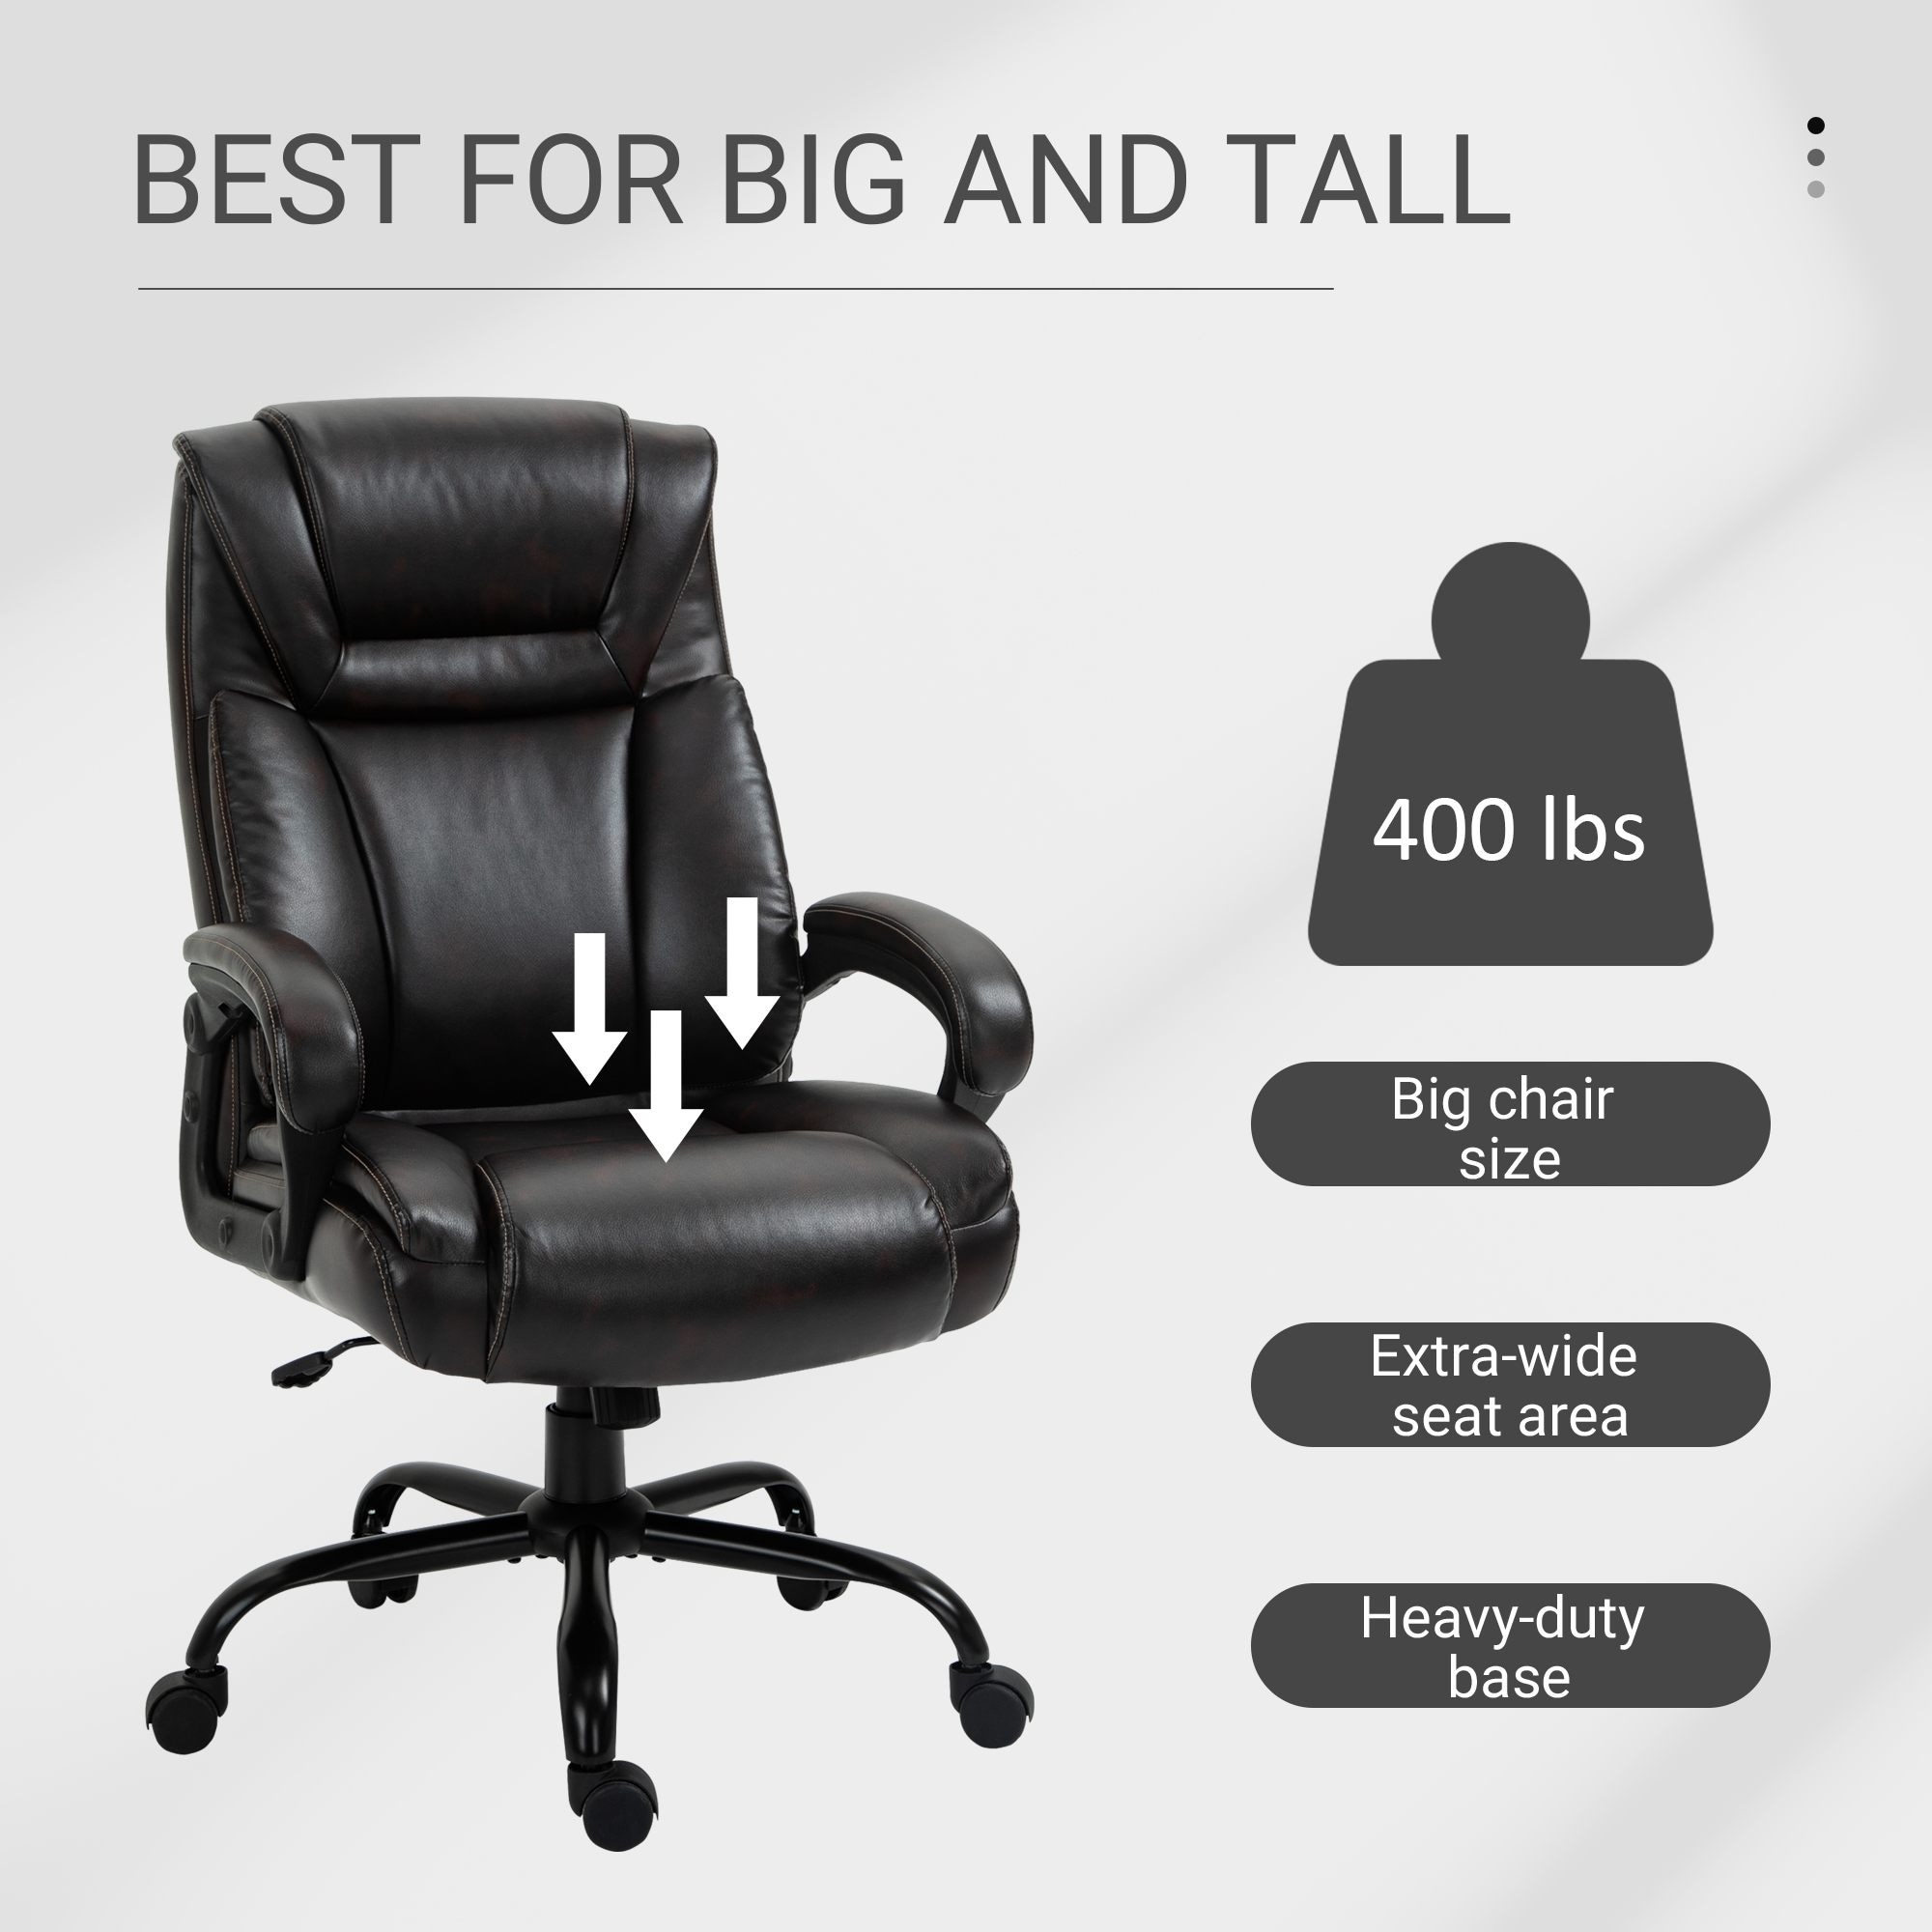 https://ak1.ostkcdn.com/images/products/is/images/direct/5e41aaf2713caf180385fe8562bae52001d8181e/Vinsetto-Big-and-Tall-Executive-Office-Chair-400lbs-Computer-Desk-Chair-with-High-Back-PU-Leather-Ergonomic-Upholstery.jpg